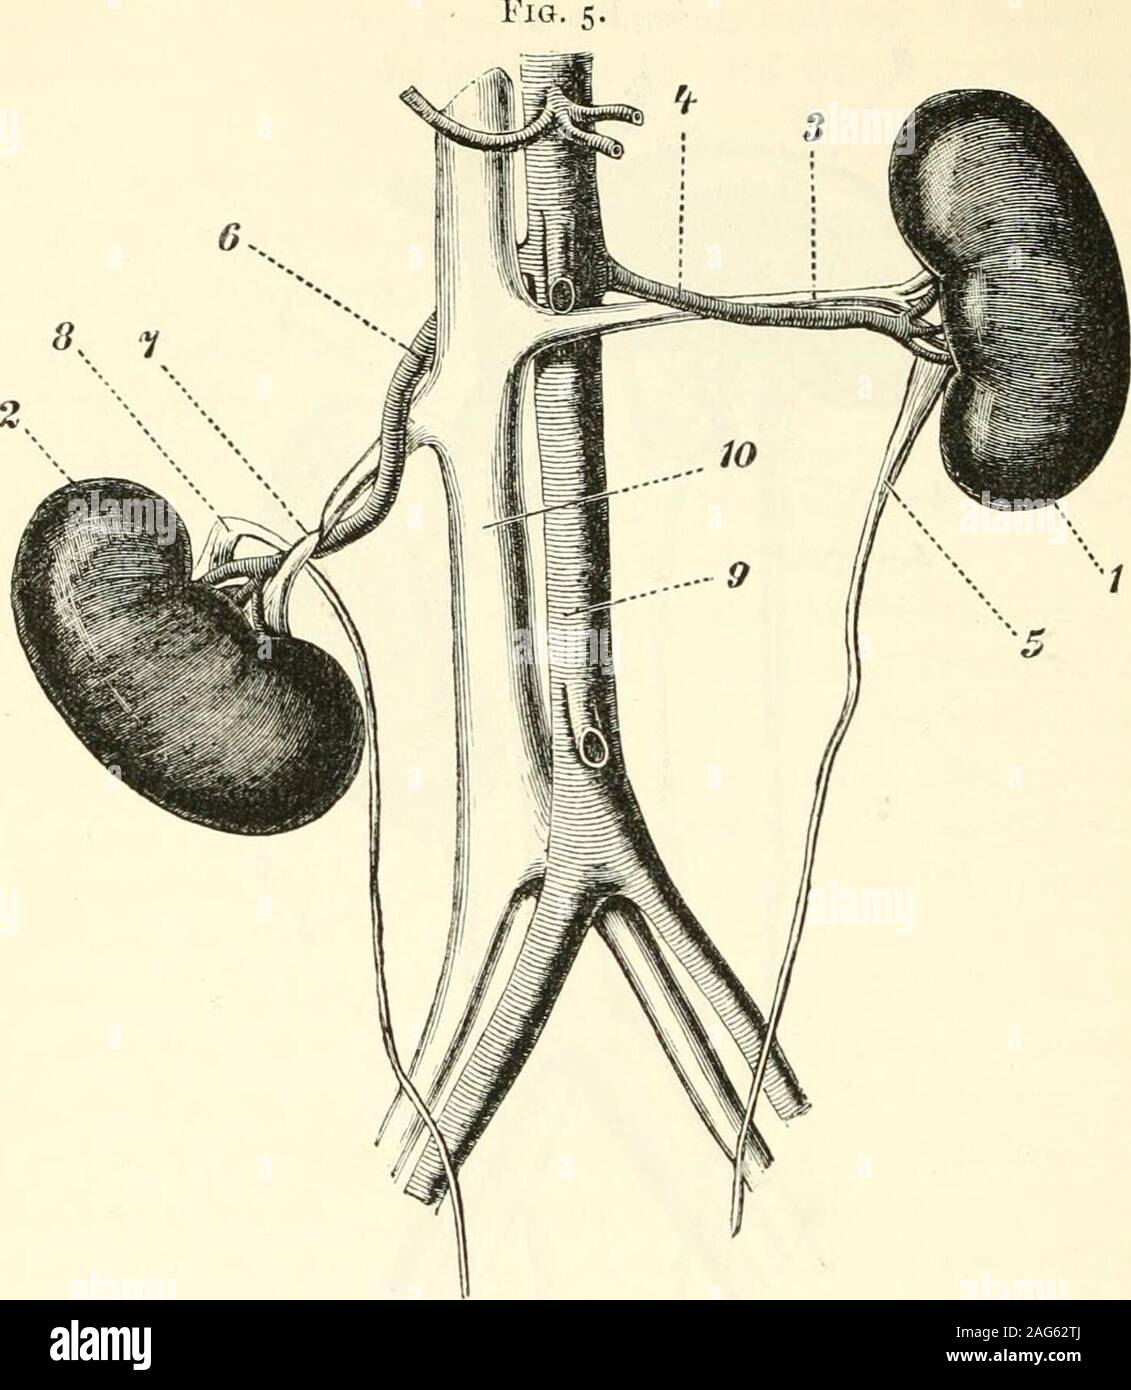 . Selected monographs, comprising Albuminuria in health and disease. ..?i 1. Left kidney. 2. Right kidney. 3. Left renal vein kinked and twisted. 4. Right renal vein compressed. 5. Ureter. 6. Abdominal aorta. 7. Vena cava inferior. Tliere are, perhaps^ few pathological processes which havebeen so accurately investigated as the coarser disturbancesof circulation in the renal vein. Max Hermann and Ludioig(i 14) found that after tying the renal vein the tubuli uriniferibecame completely closed in consequence of the obstructionto the return of the blood, so that the secretion of urineceased. If th Stock Photo